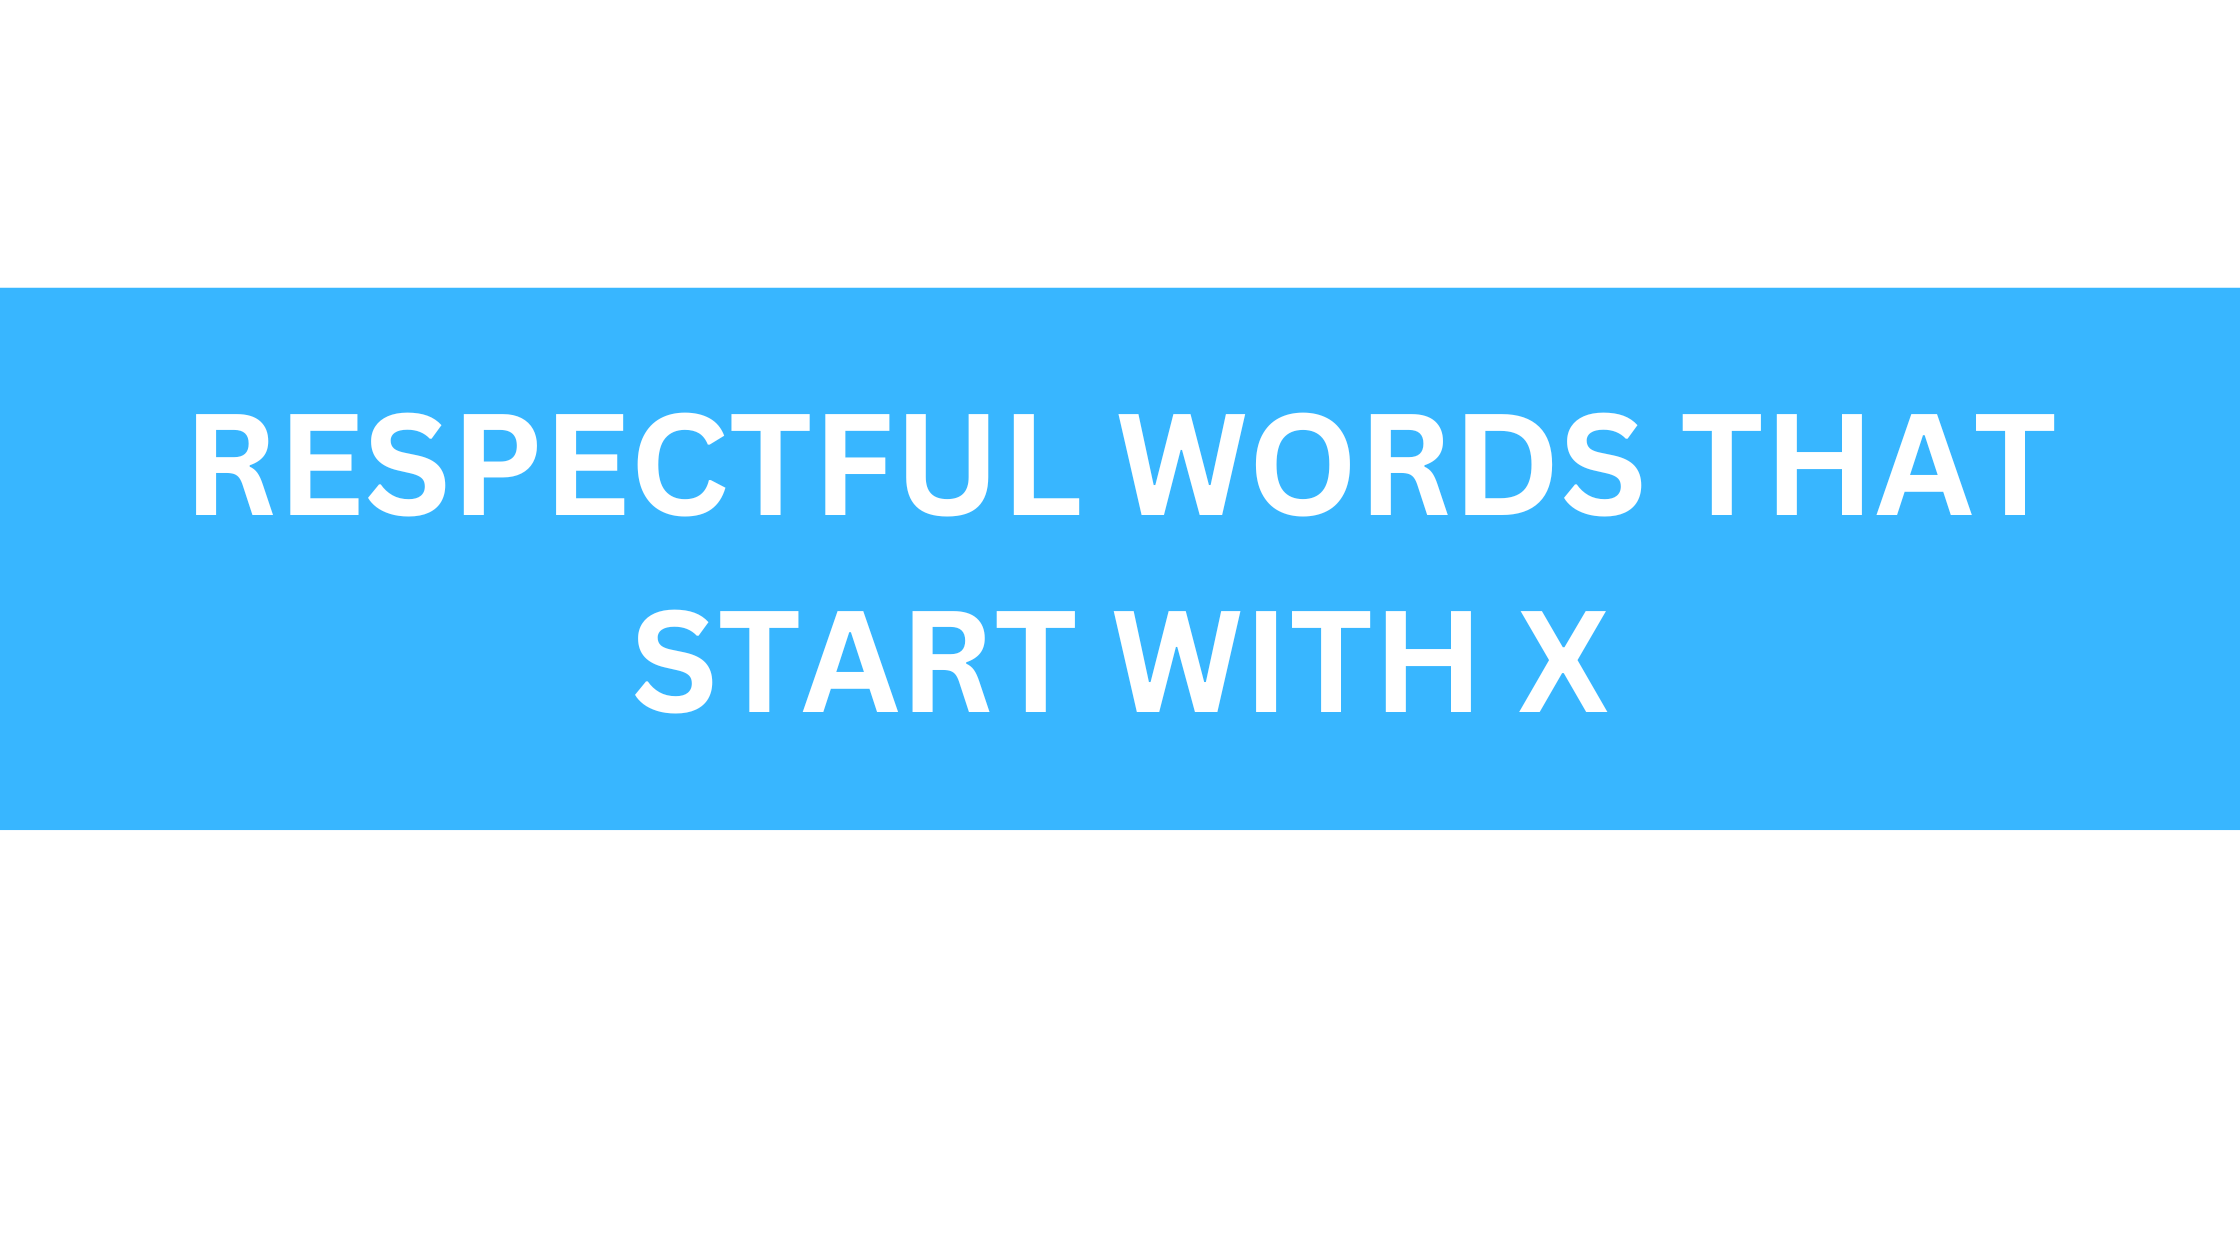 respectful words that start with x